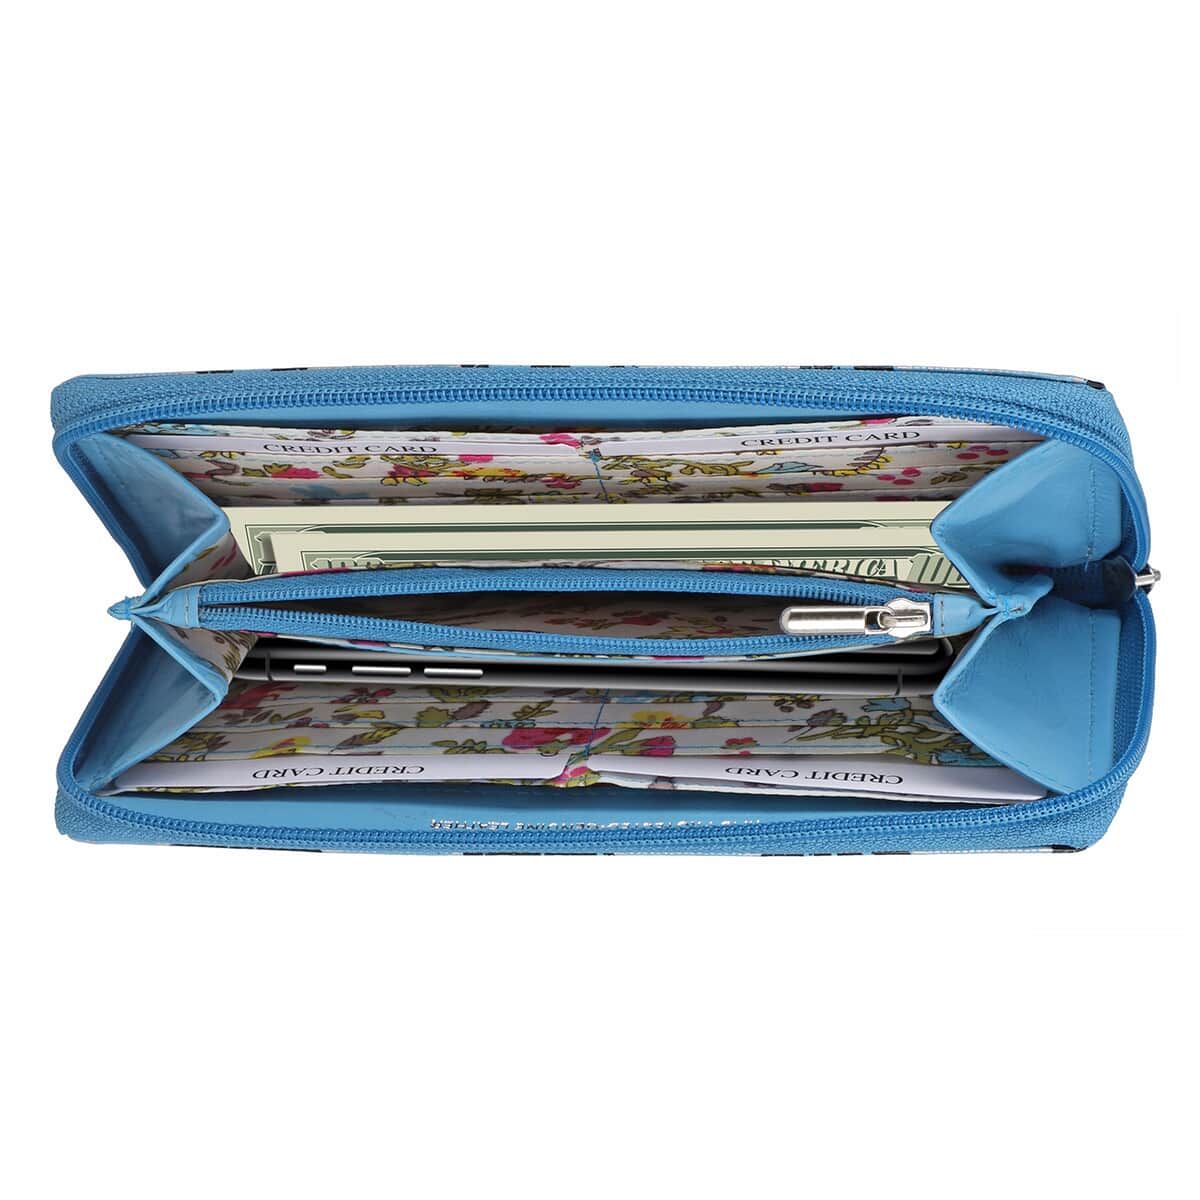 "Snakeskin Print Genuine Leather Women's Wallet SIZE: 7.5(L)x4.5(W)x0.5(H) inches COLOR: Blue" image number 4